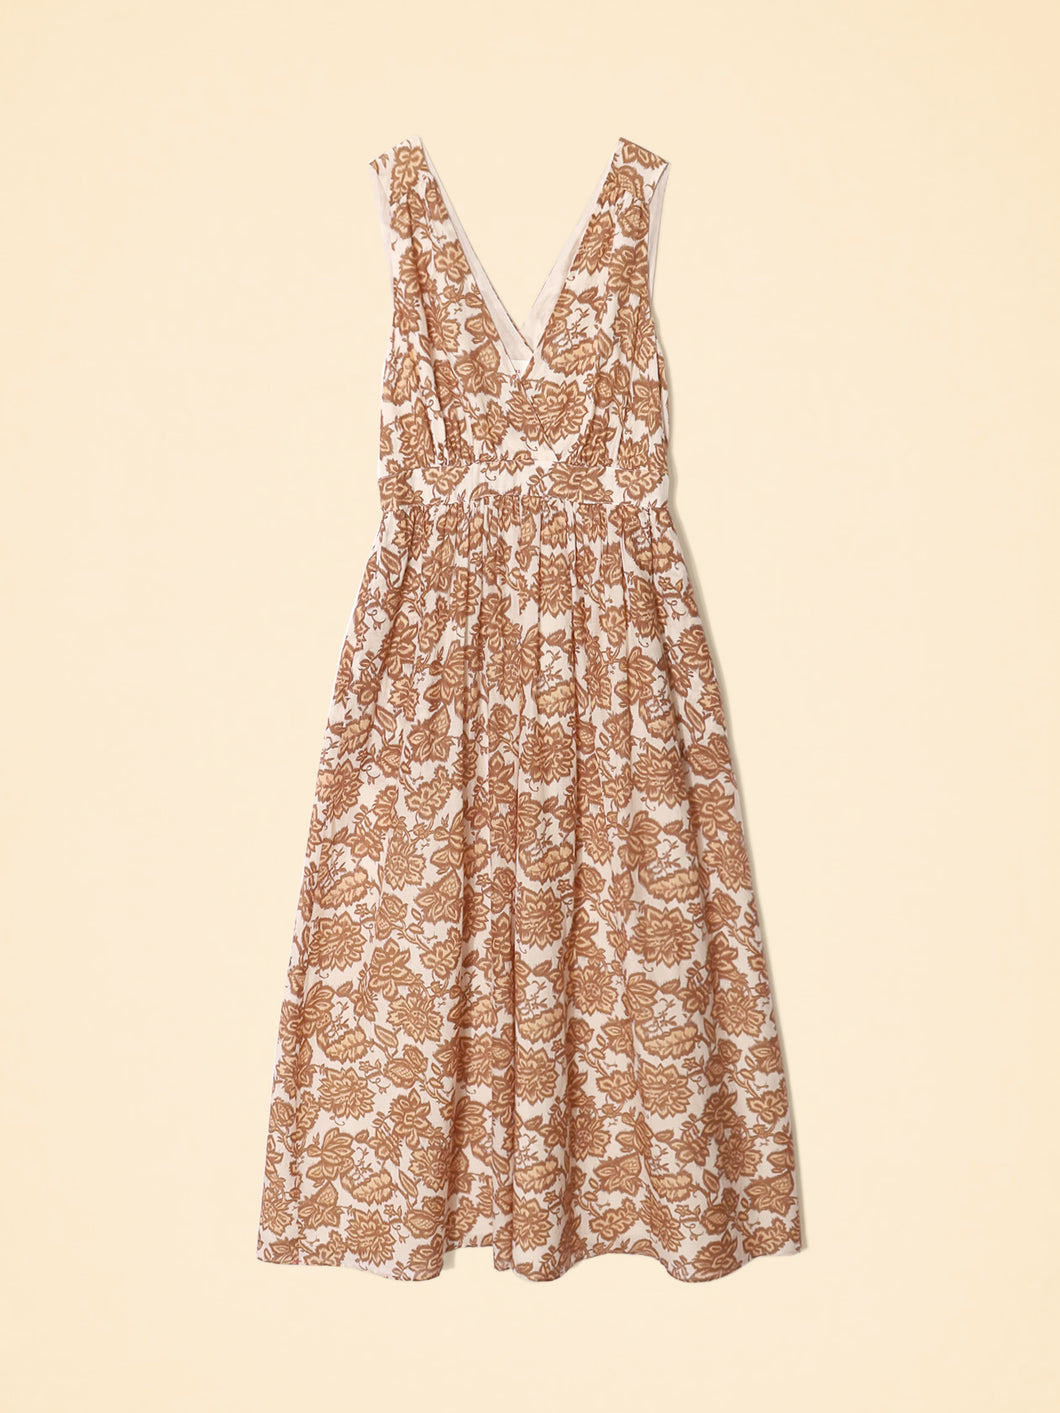 Rayven Dress in Cream Toffee